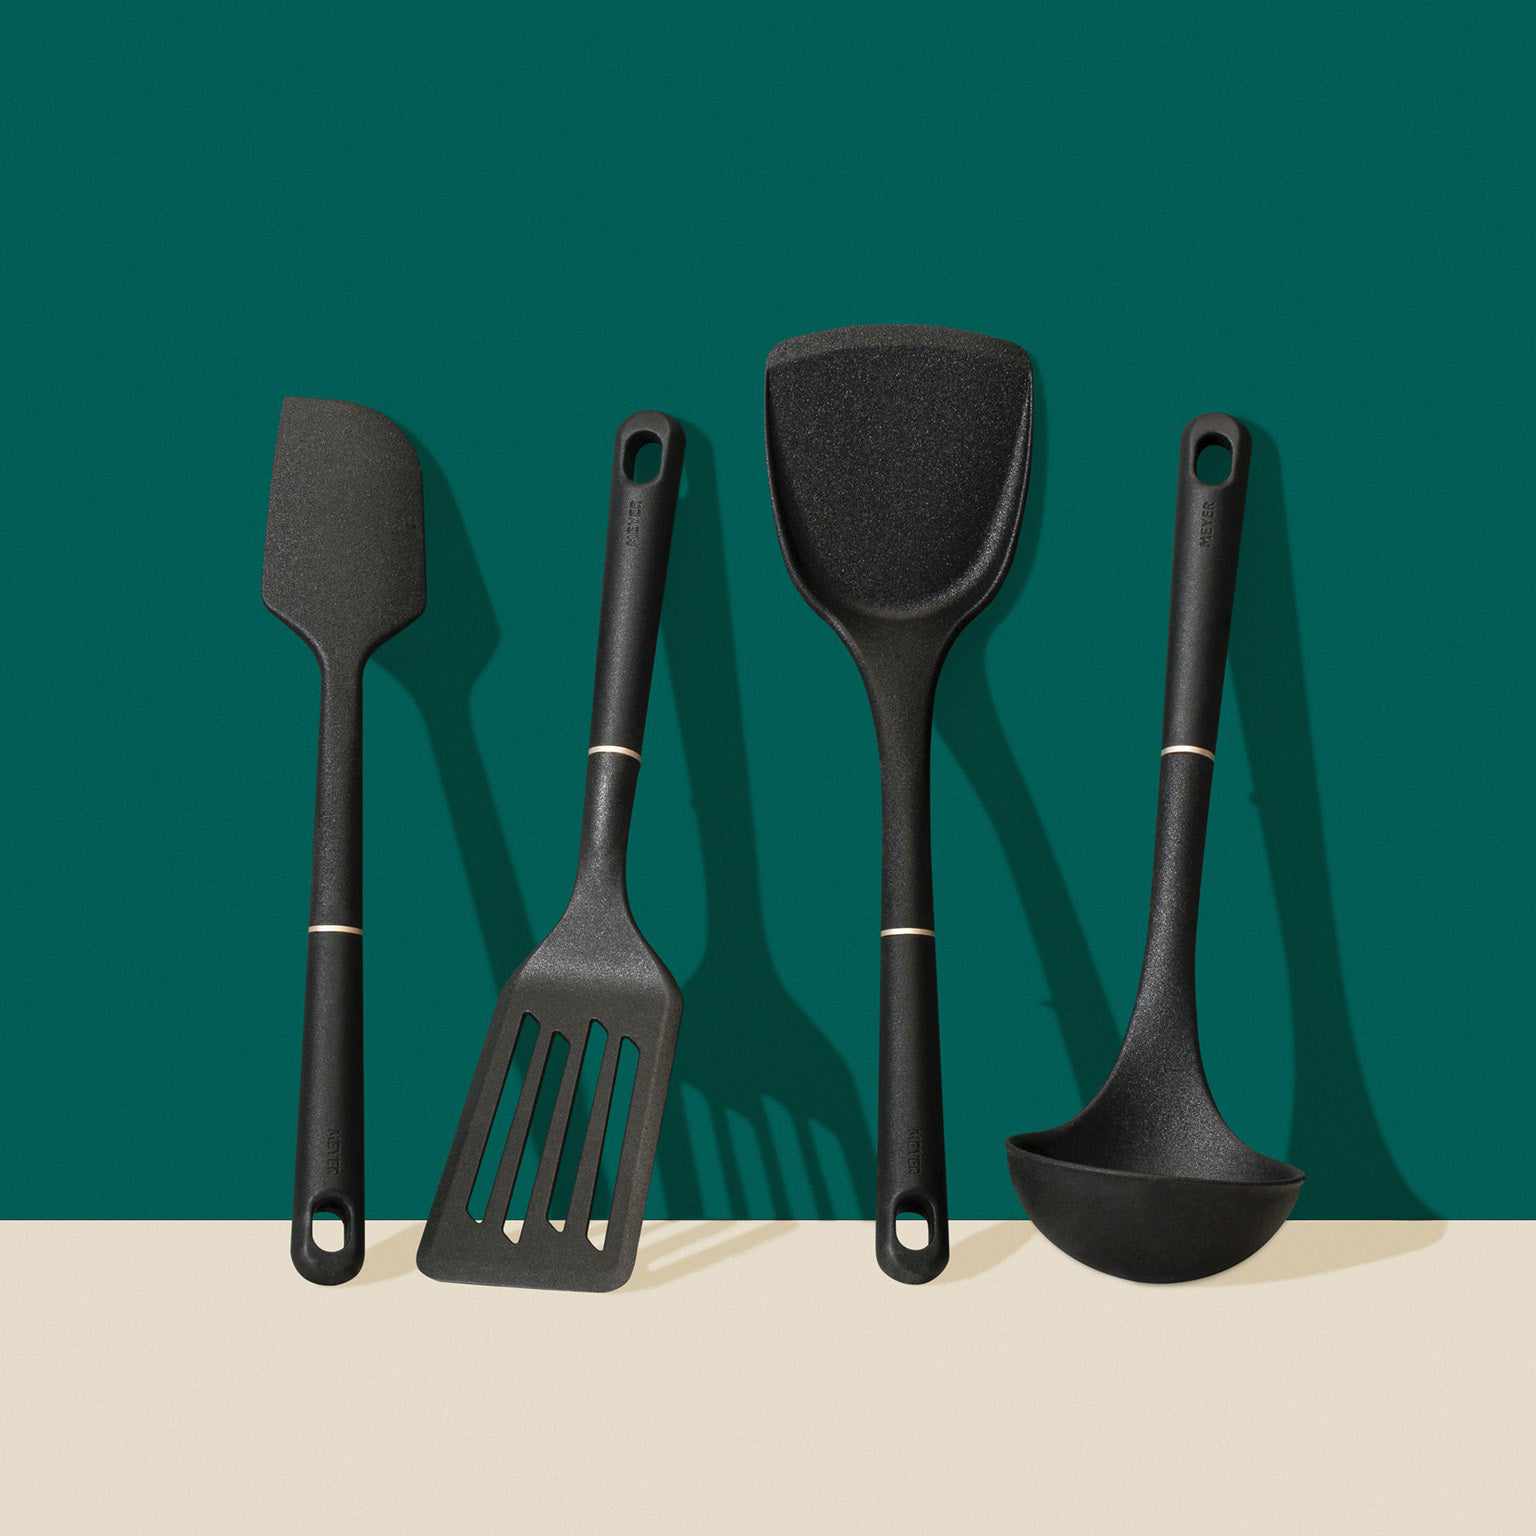 Meyer Silicone Kitchen Cooking Utensil and Tool Set, 4-Piece